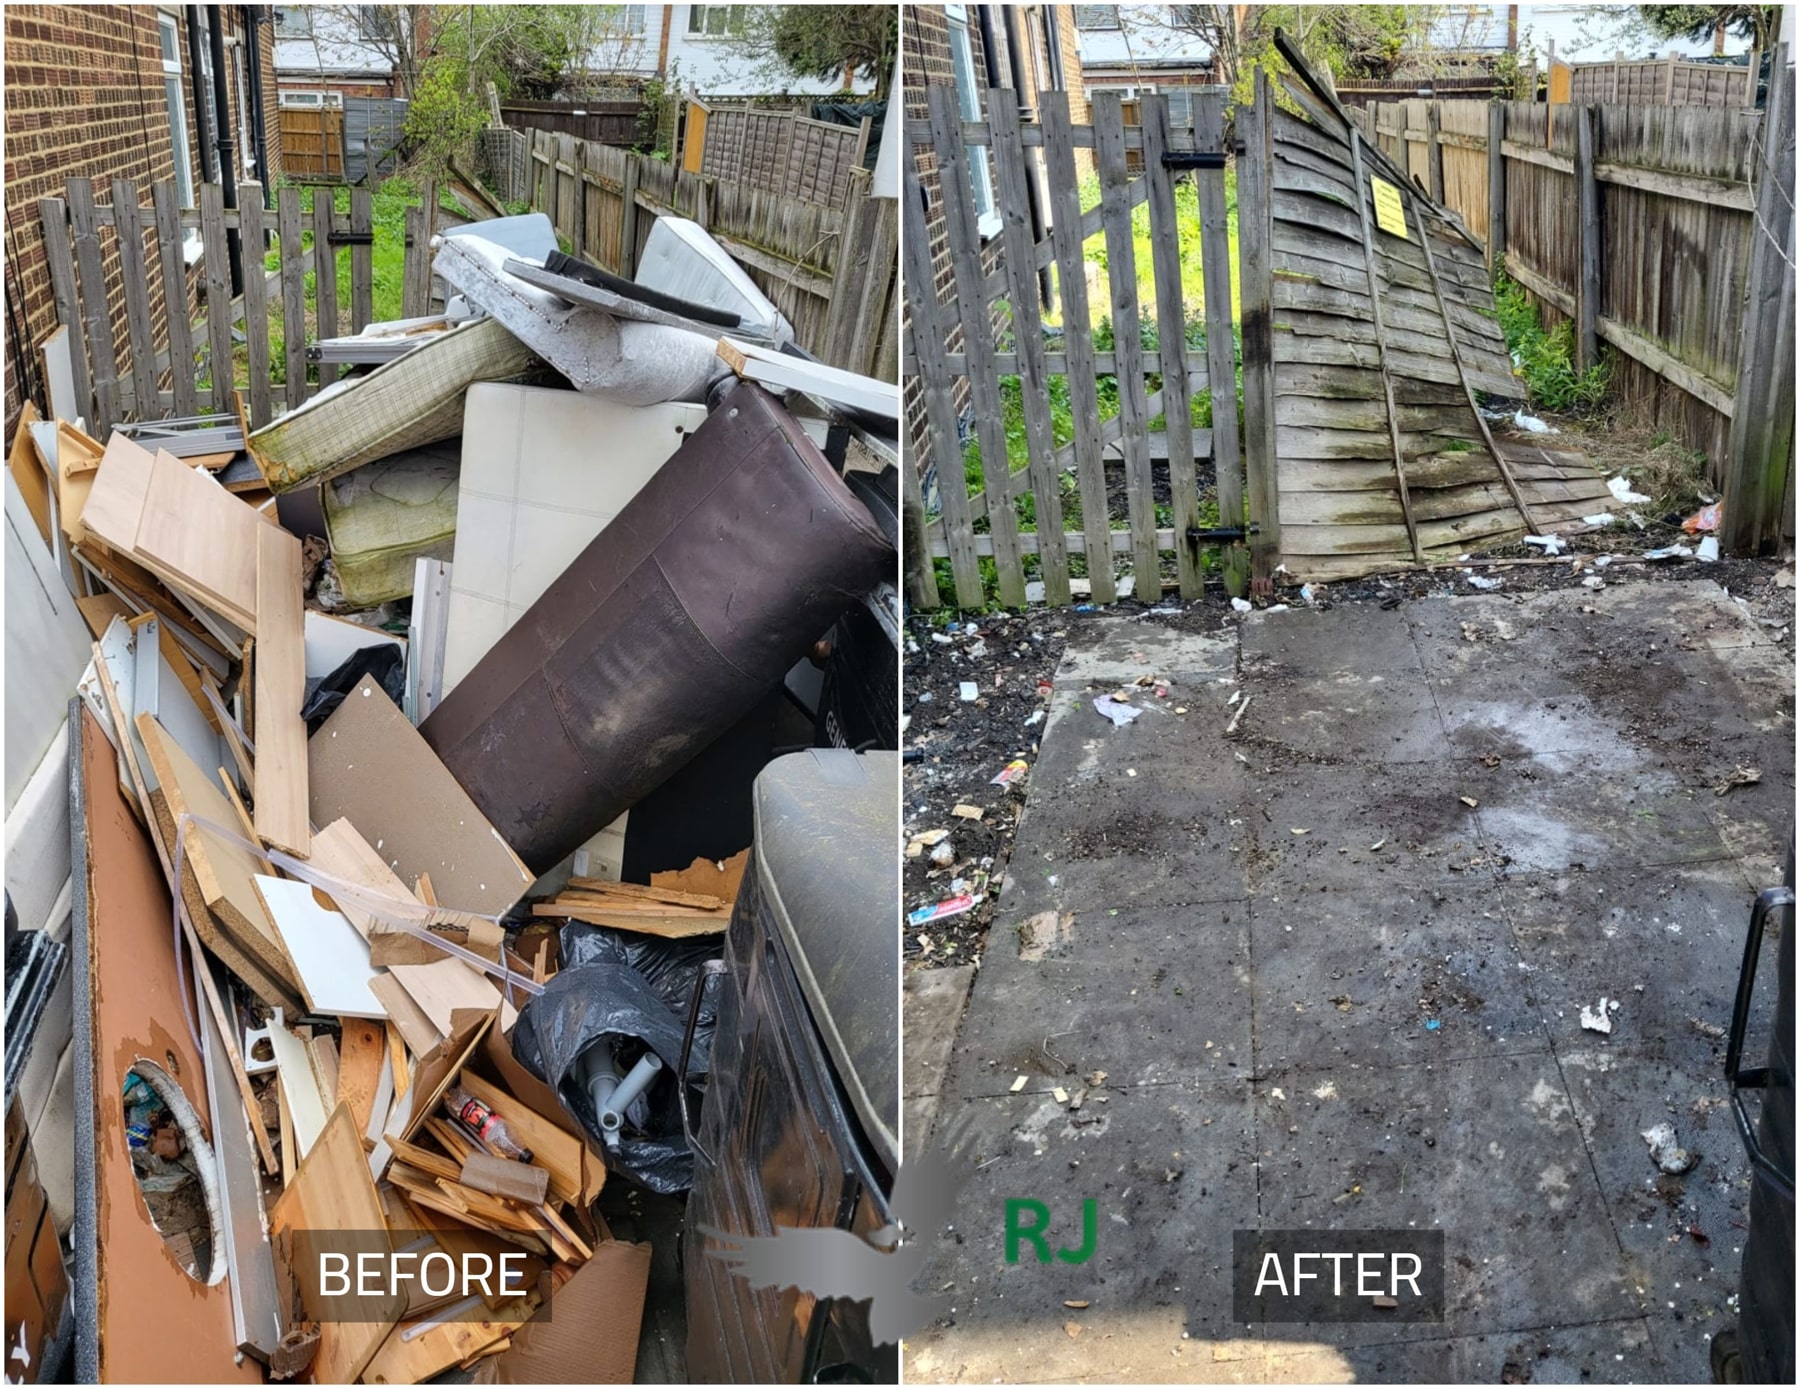 Waste Clearance Sidcup